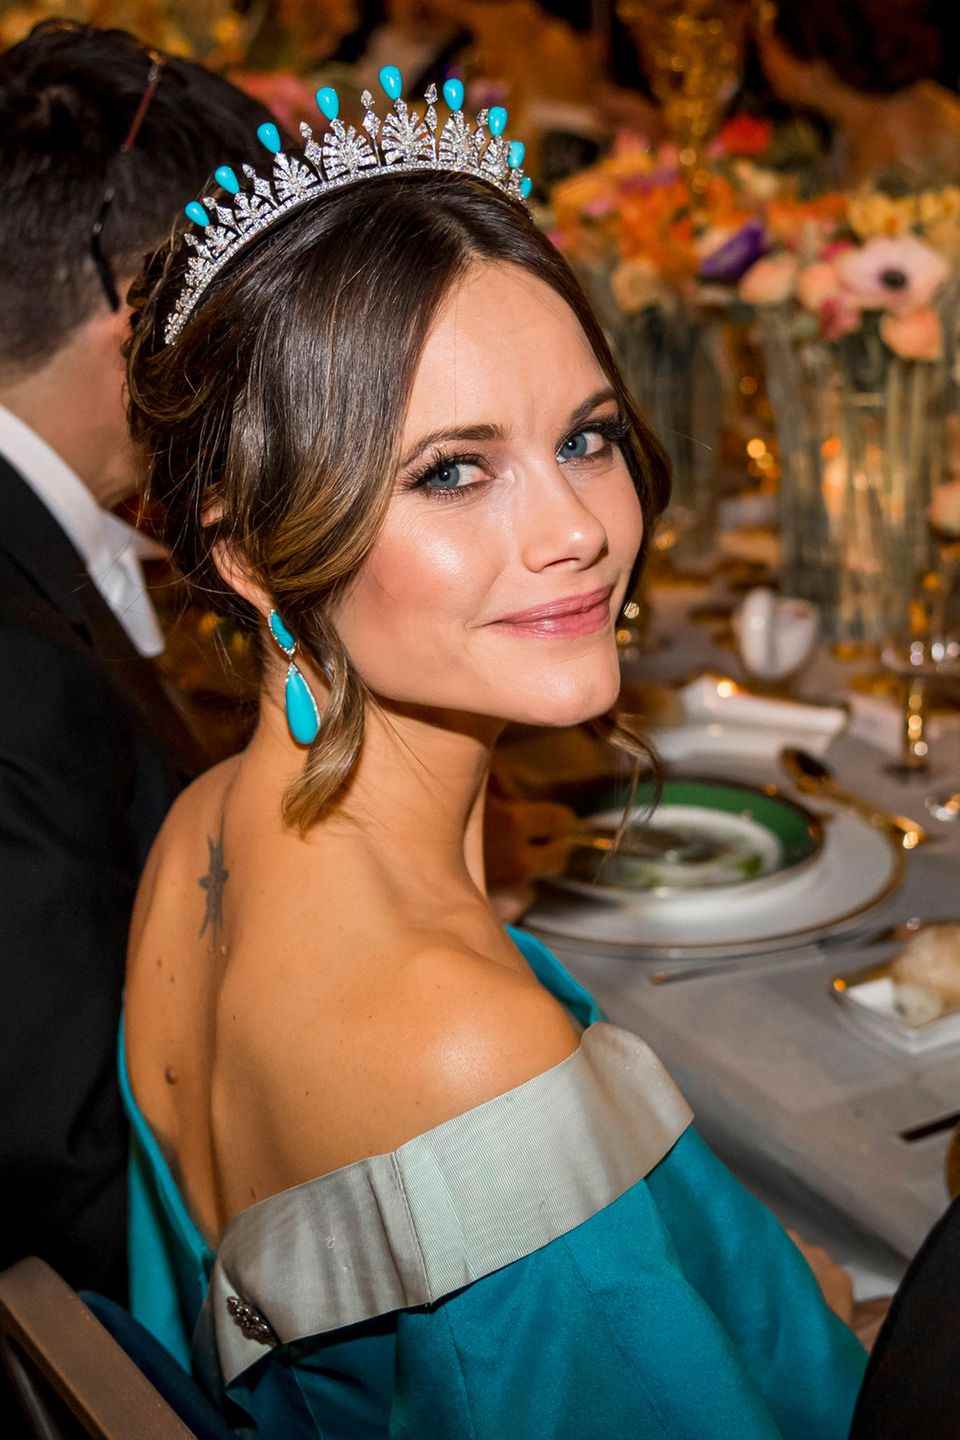 In 2019, Princess Sofia wears the tiara with turquoise